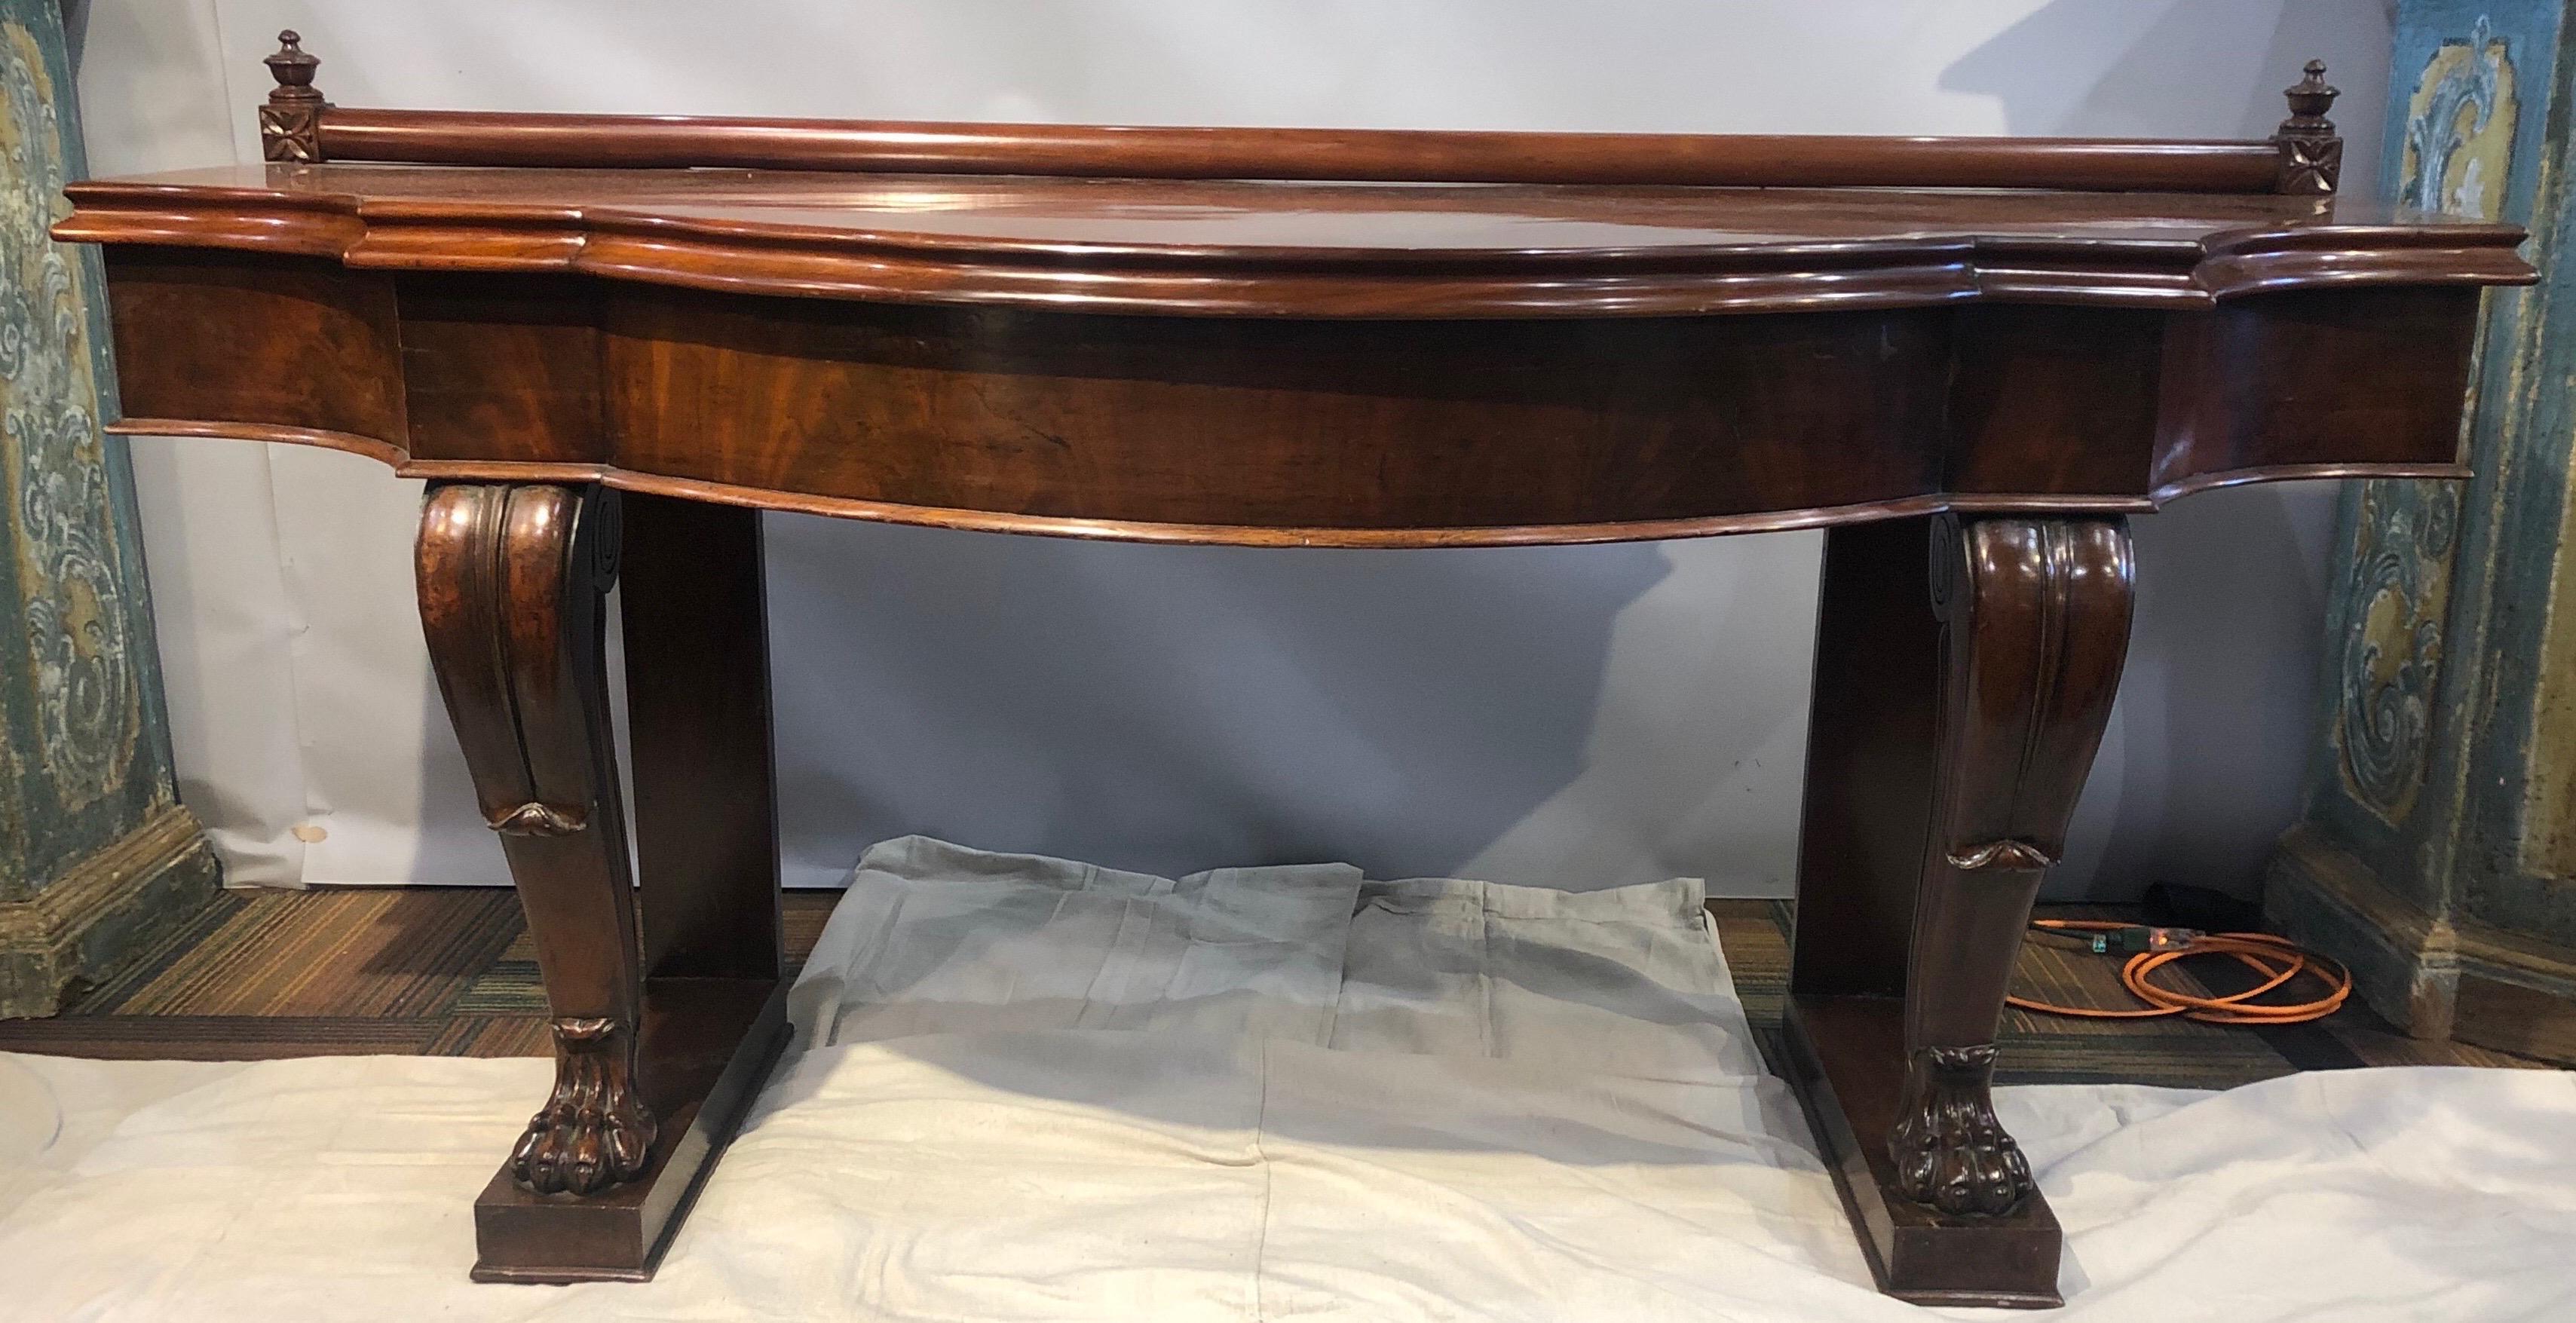 19th century Irish mahogany console. Solid serpentine top over carved paw feet.